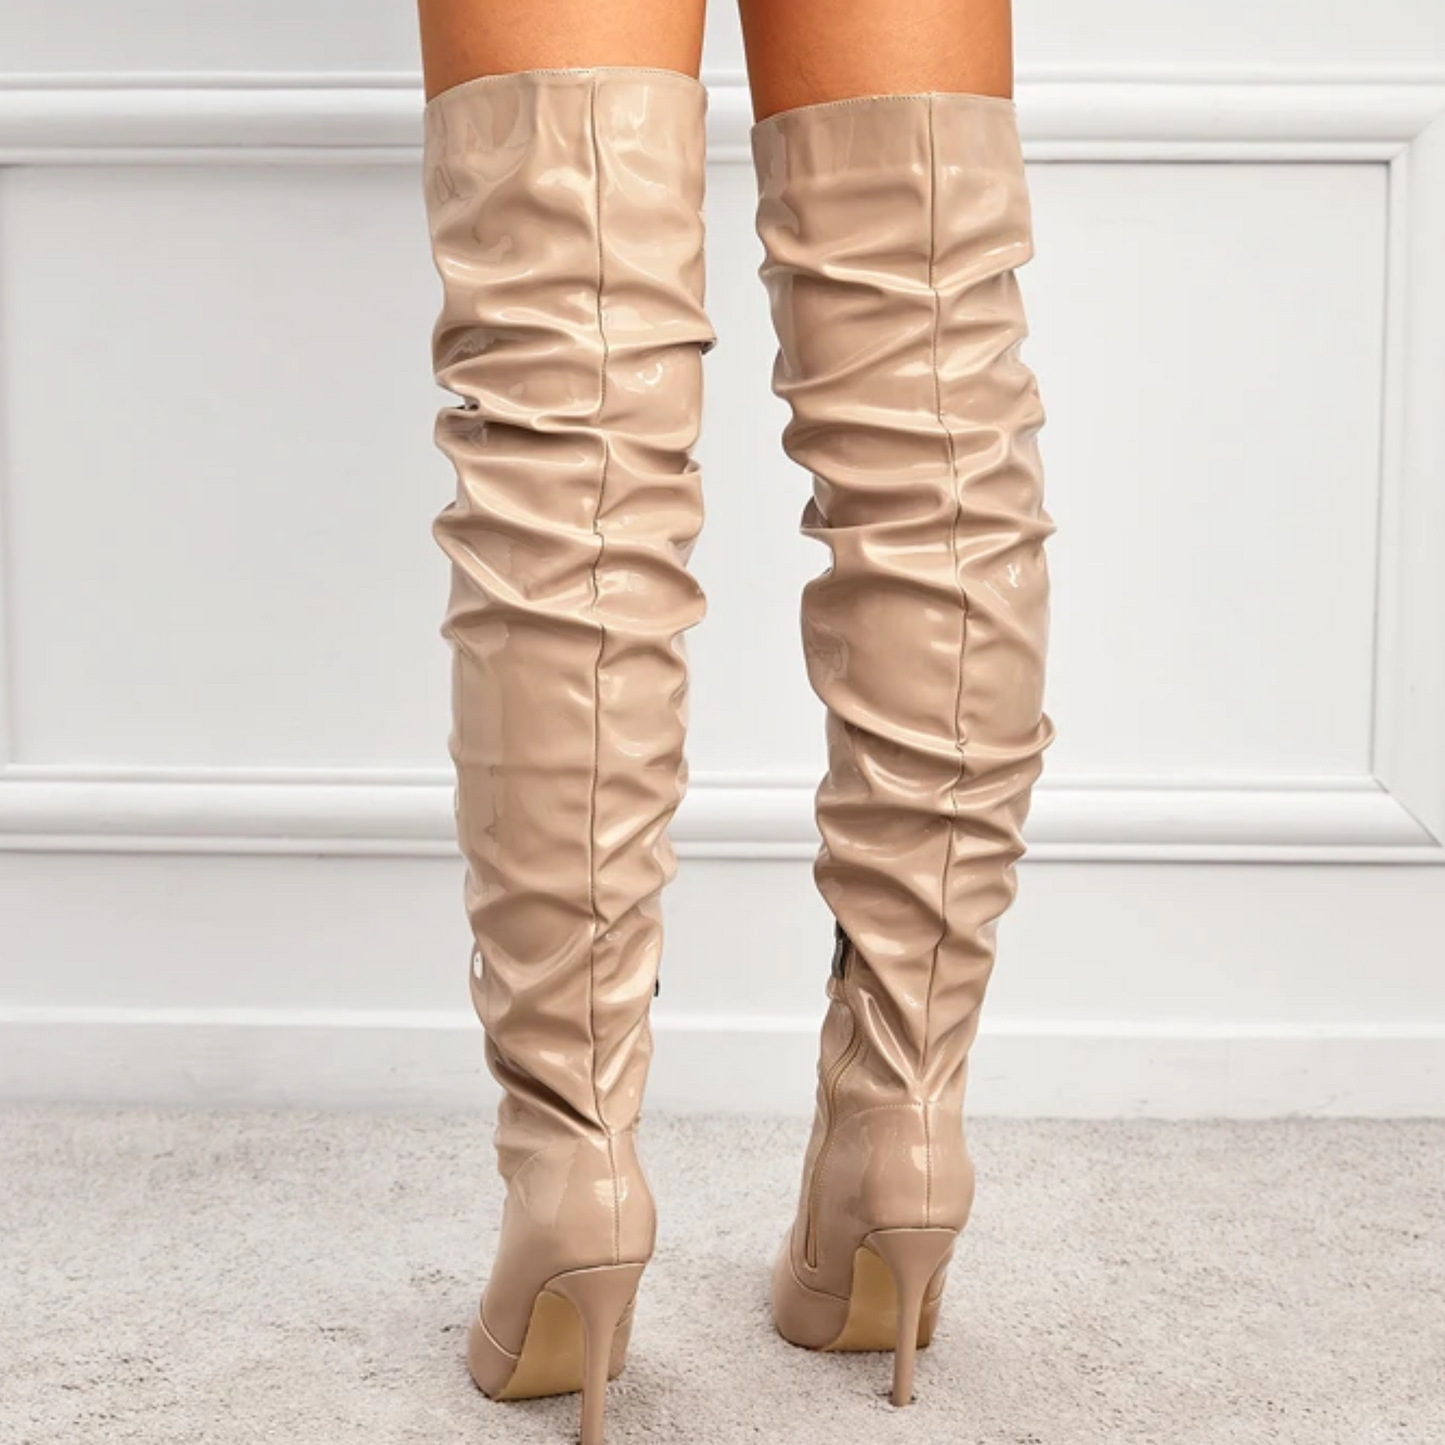 Beige Patent Leather Over The Knee Boots